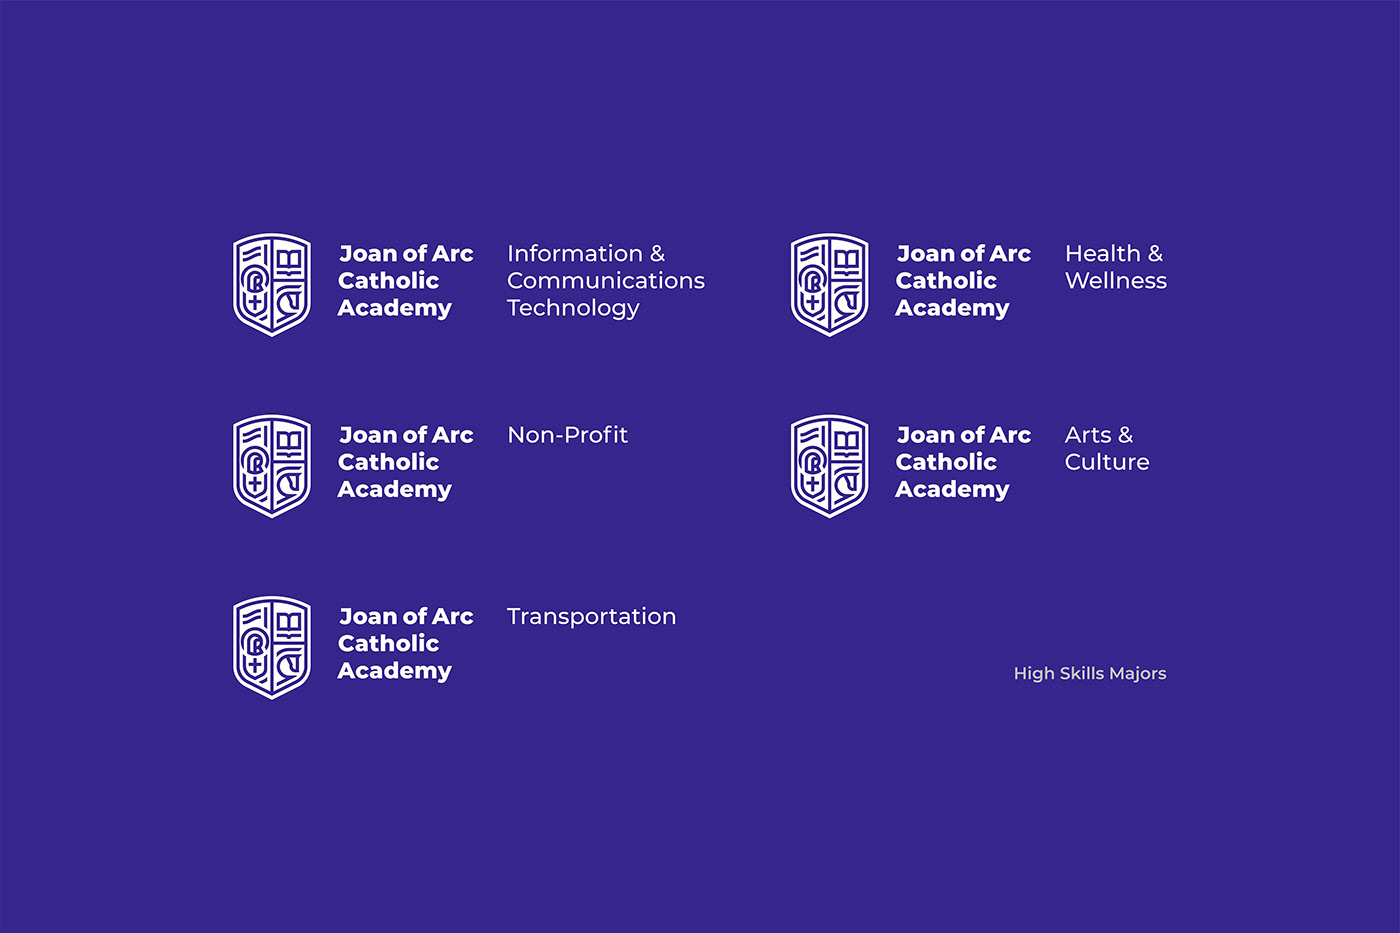 Brand identity and visual identity logo assorted with institution's high skills majors